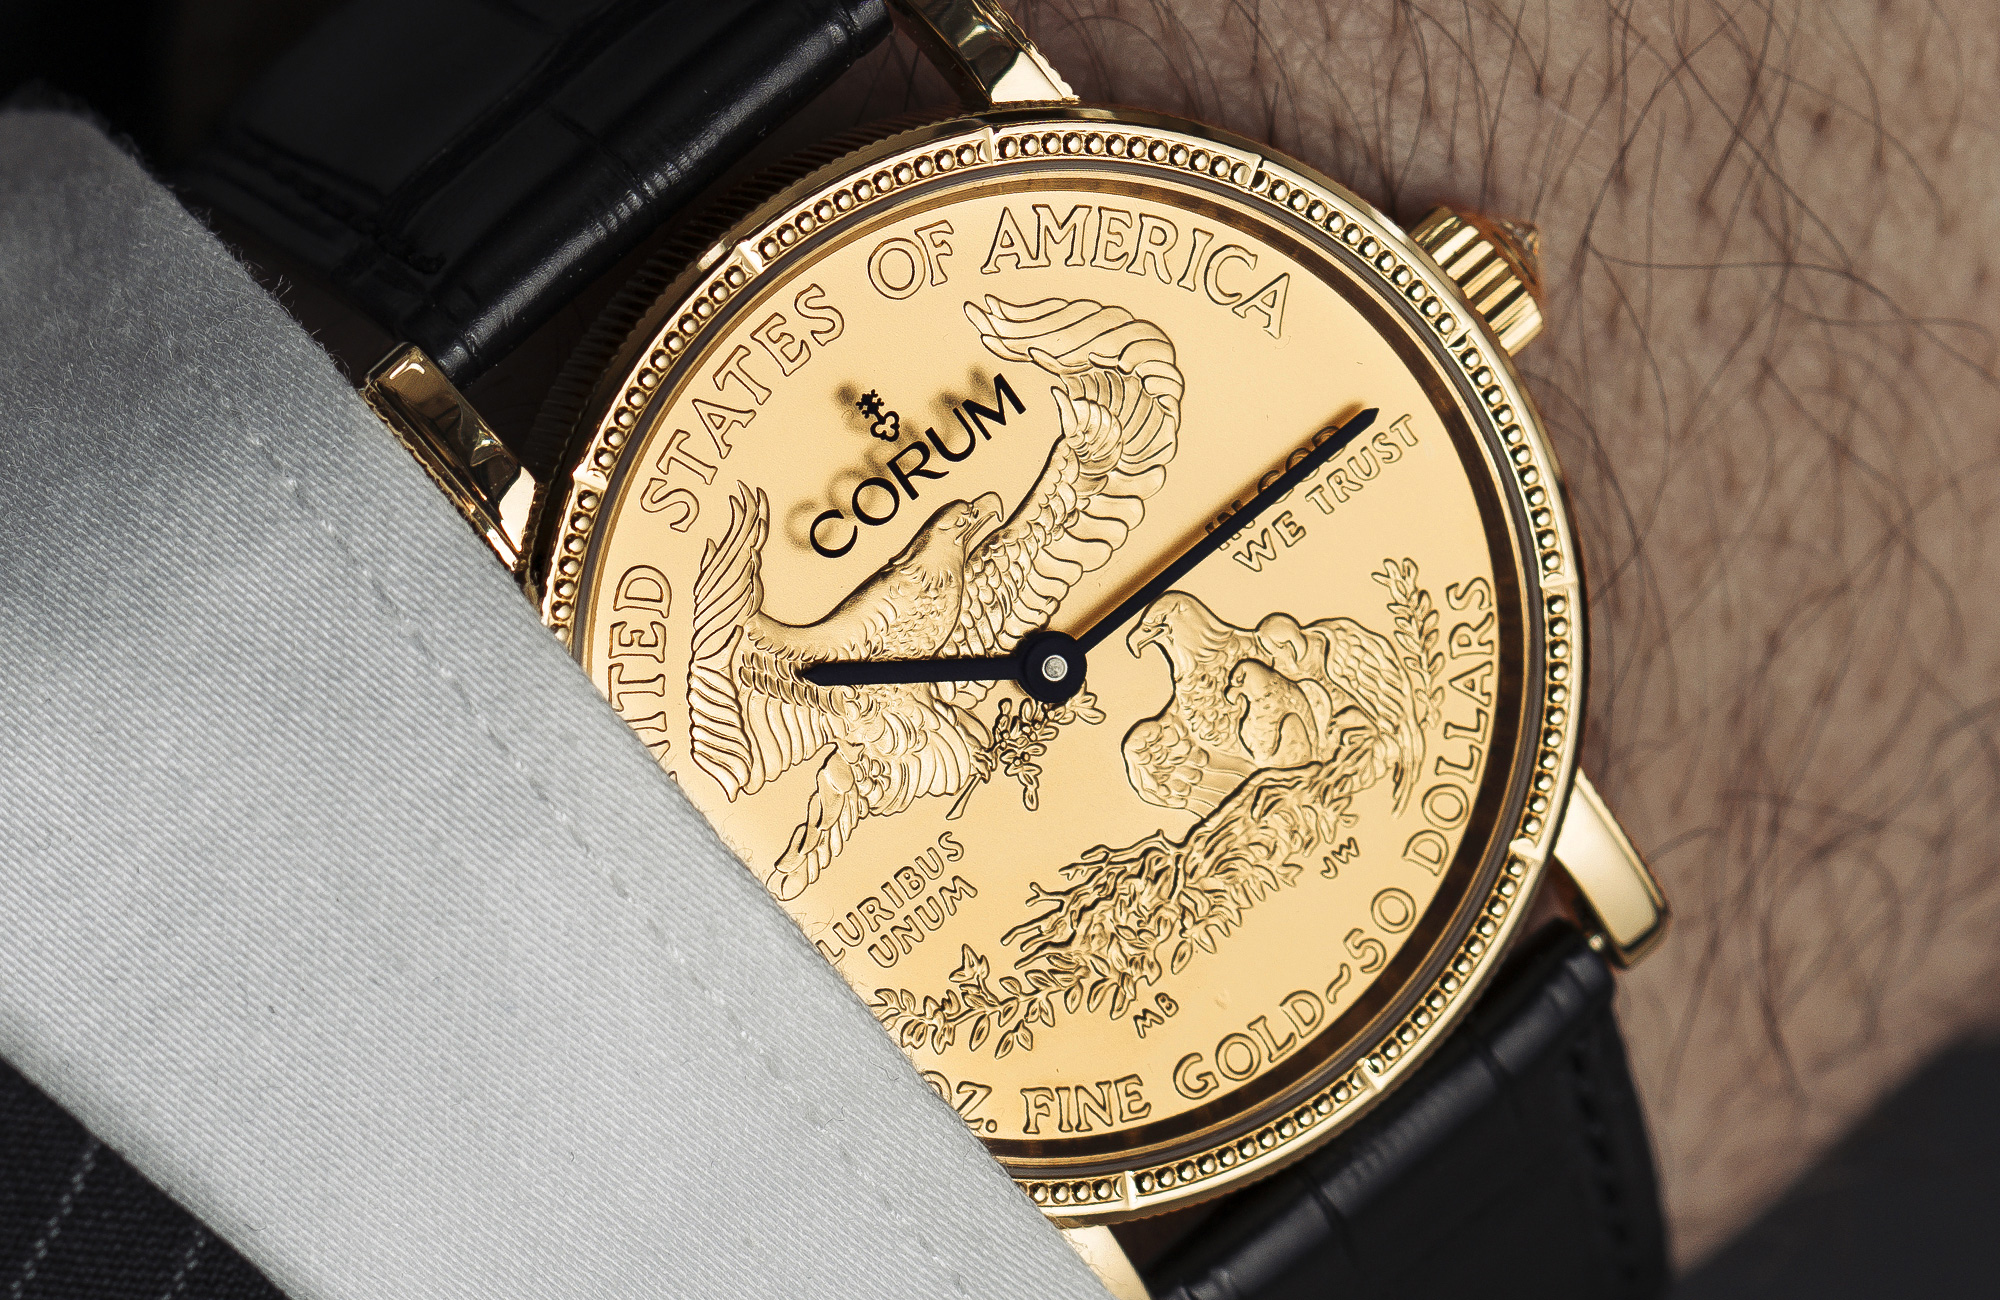 Heritage Coin Watch (C082/03599) by 